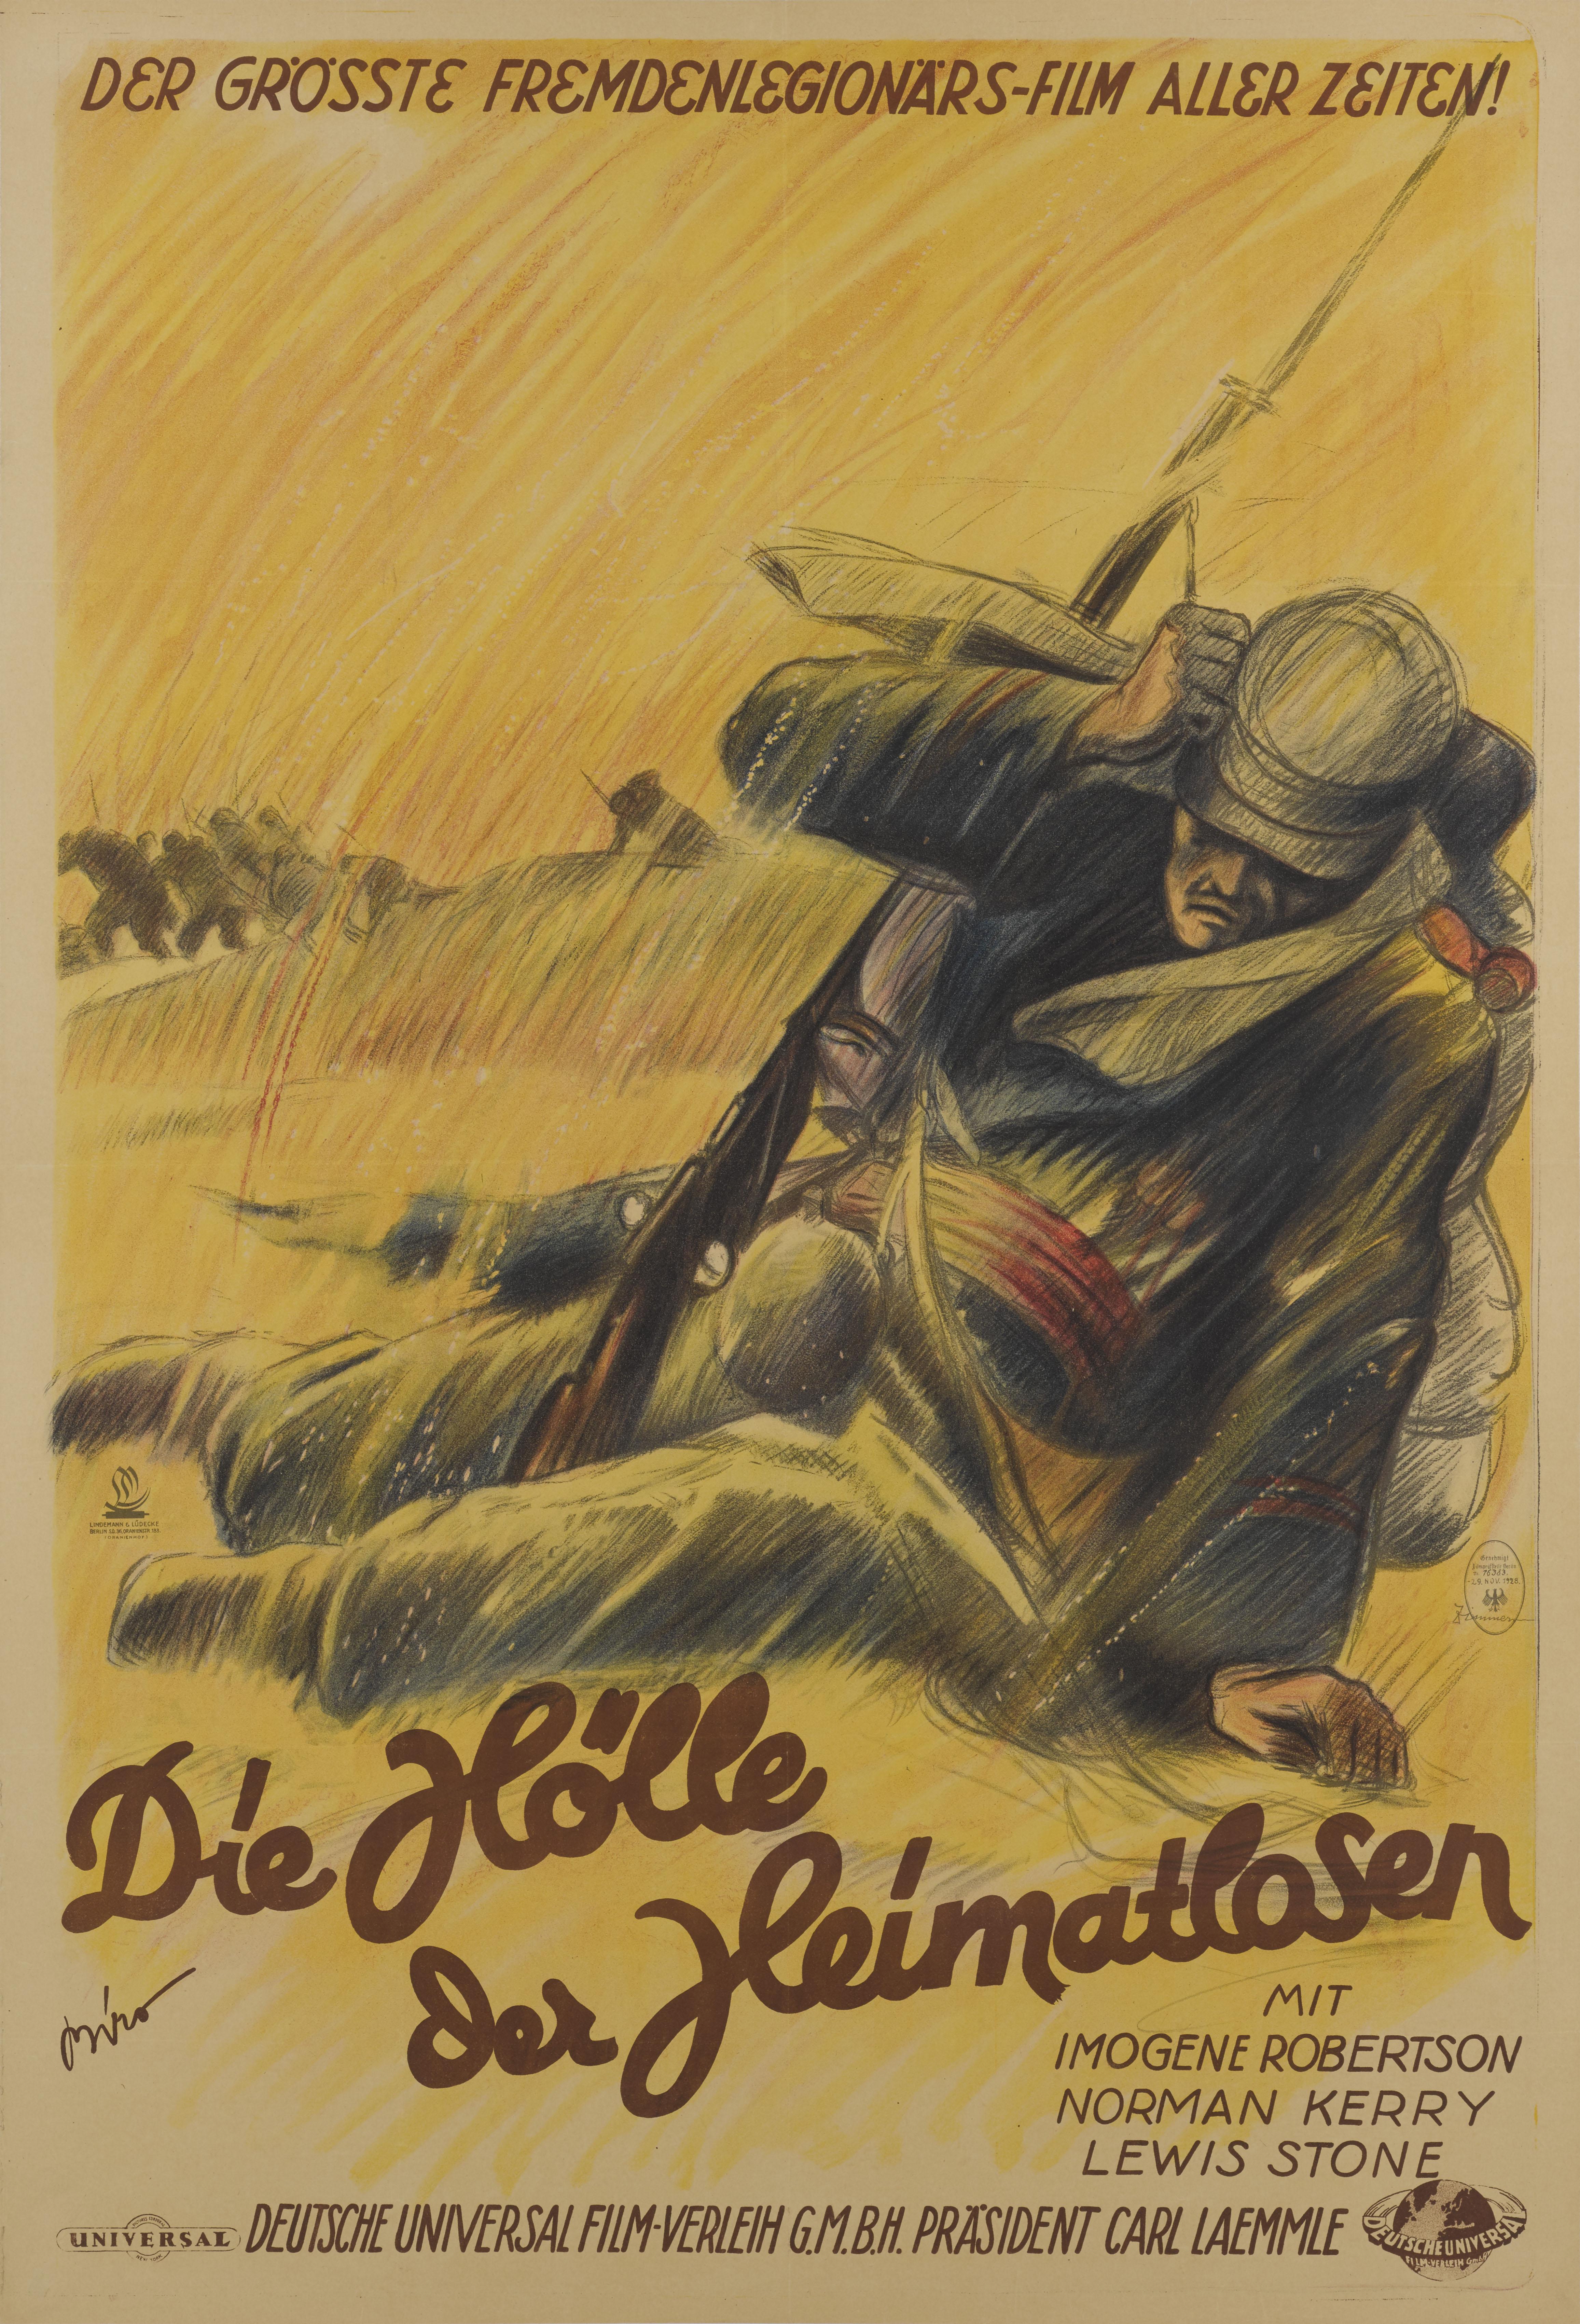 An incredibly rare original German film poster for the 1928 silent film The Foreign Legion. This film was directed by Edward Sloman and starred Norman Kerry.
The poster was designed by the Hungarian artist Mihaly Biro (1886-1948) and was previously